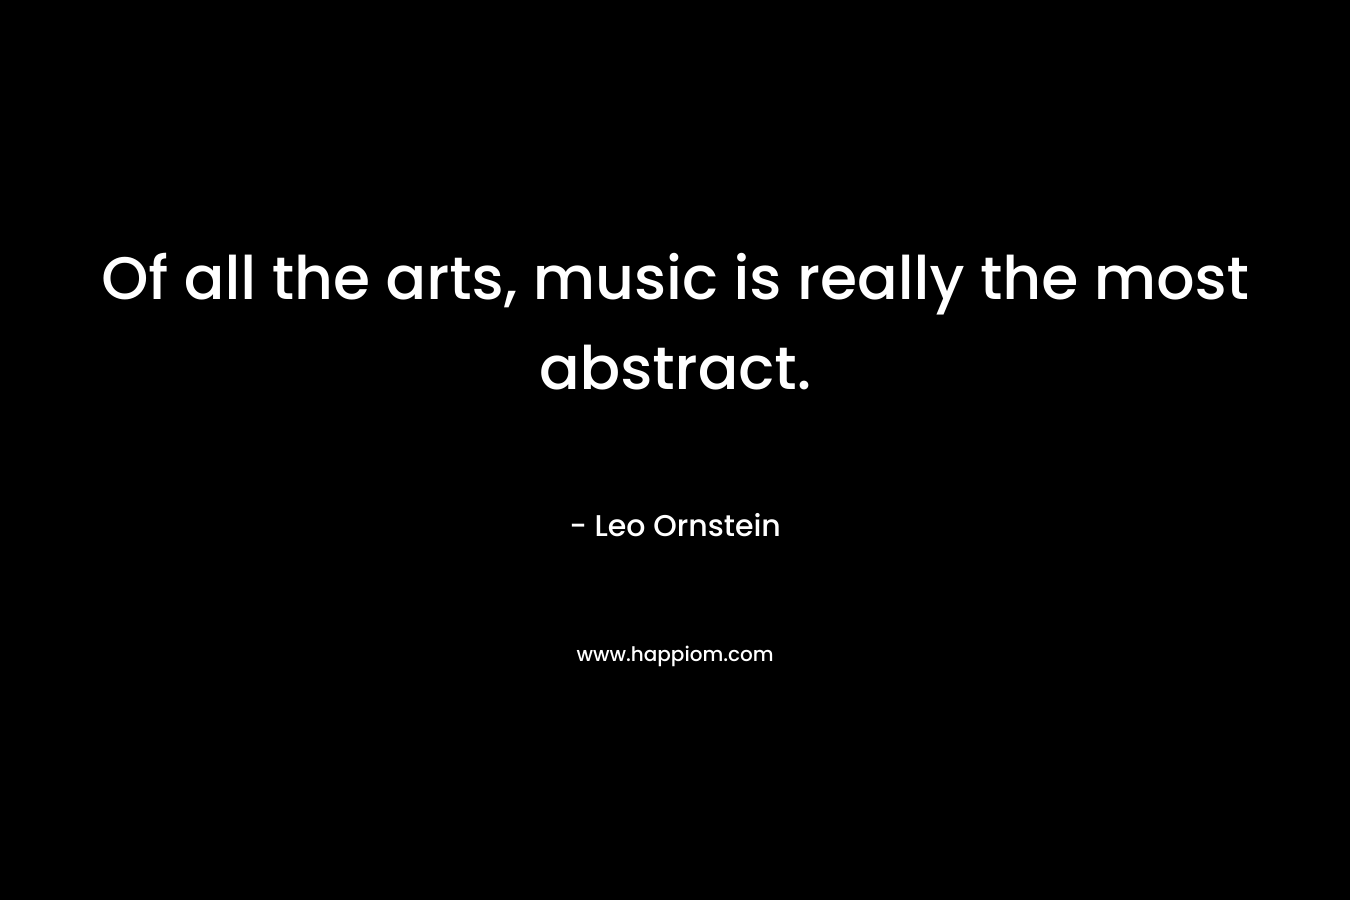 Of all the arts, music is really the most abstract. – Leo Ornstein